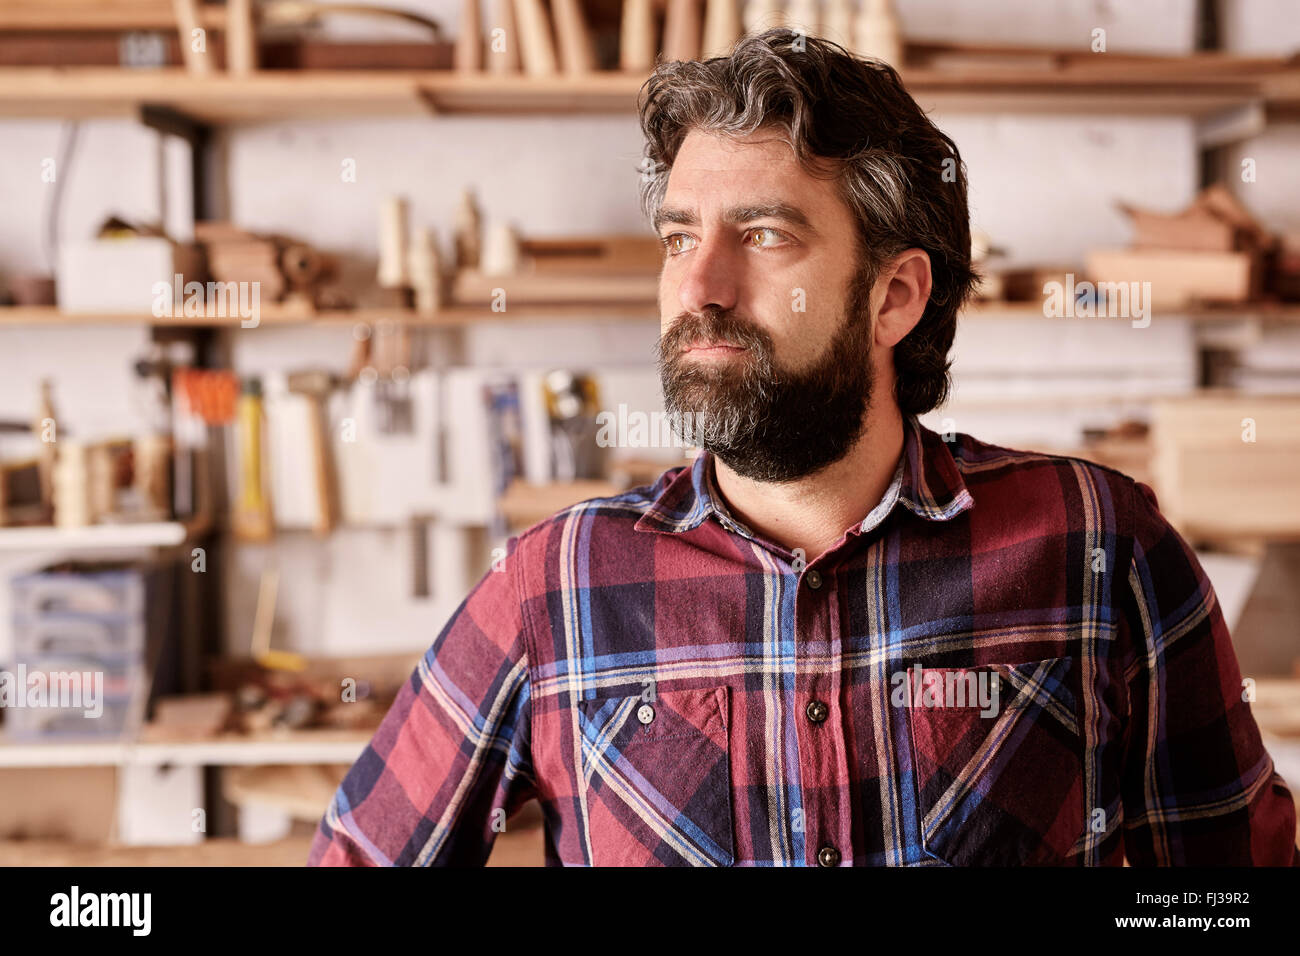 Artisan crafstman and business owner looking away seriously Stock Photo